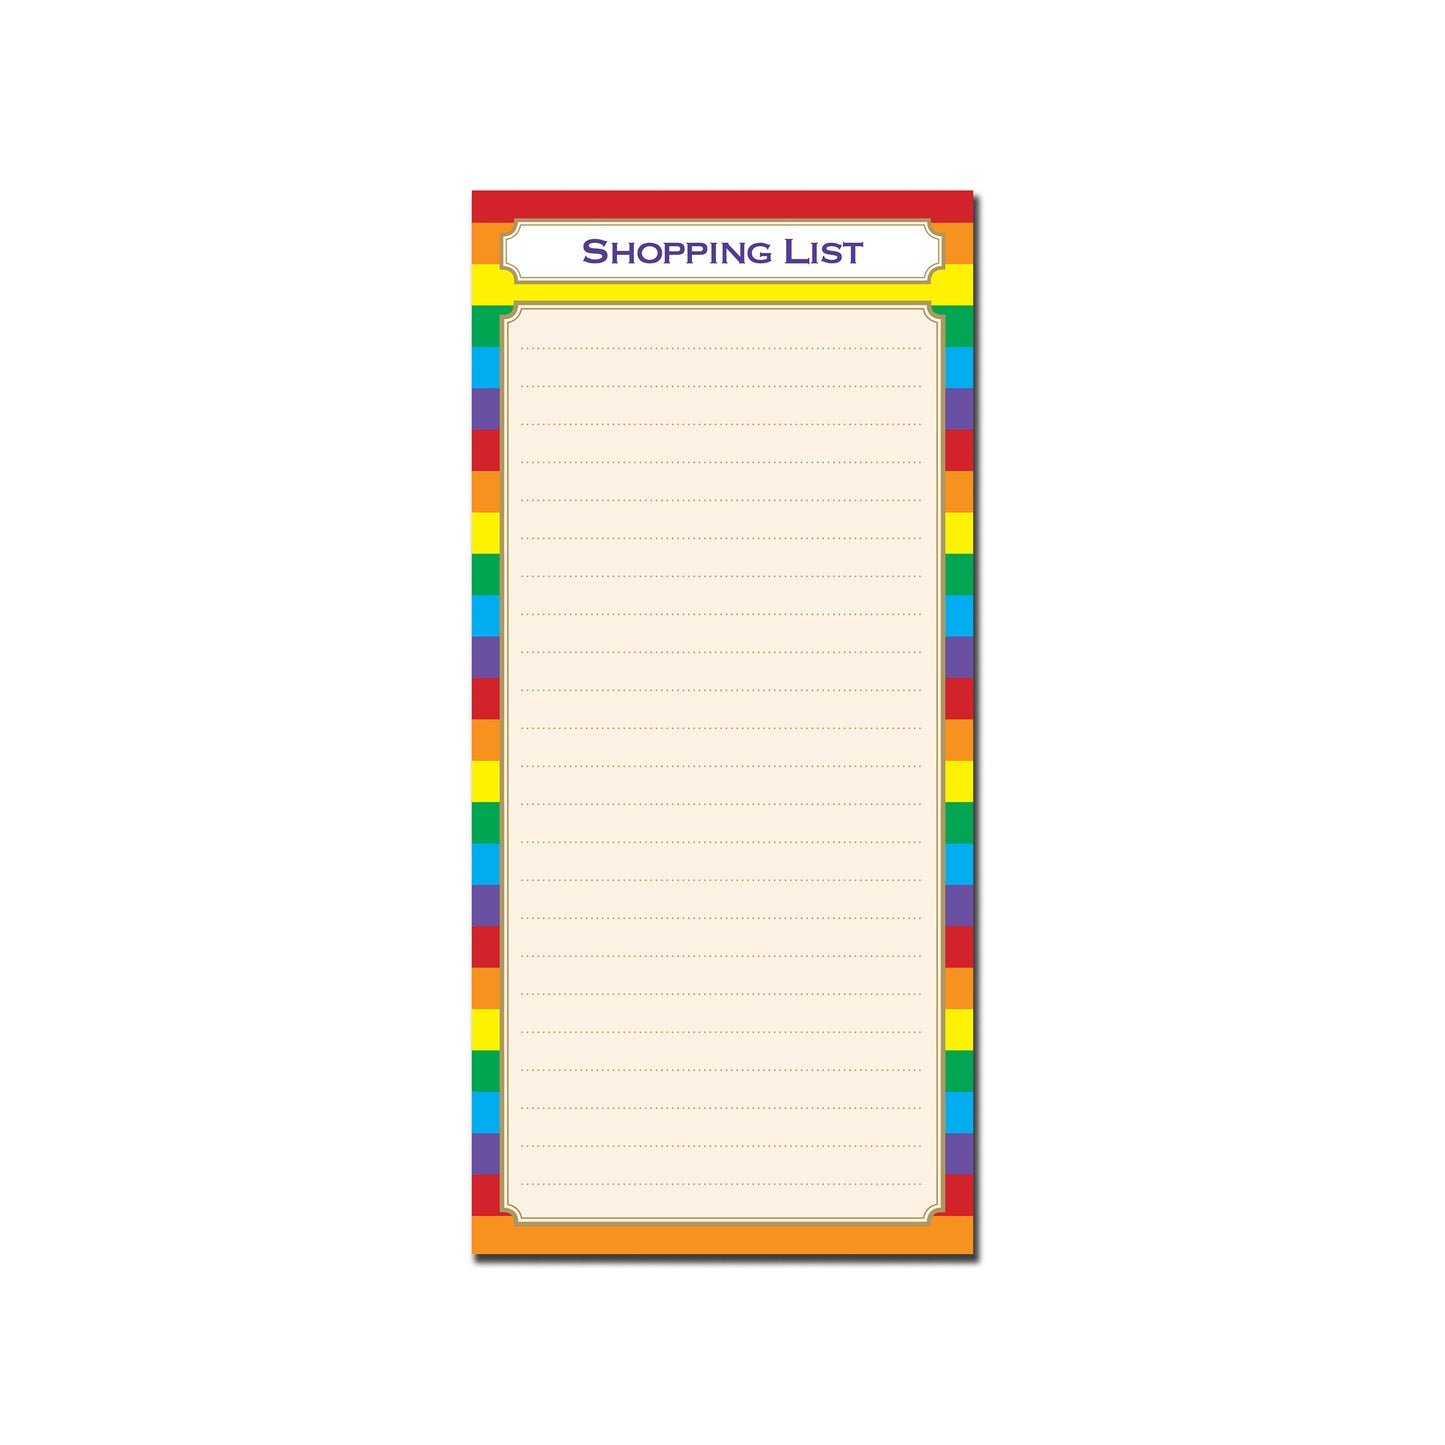 Designer Range Shopping List Pad 99mm x 210mm 80gsm 100pages with Magnetic Strip on back